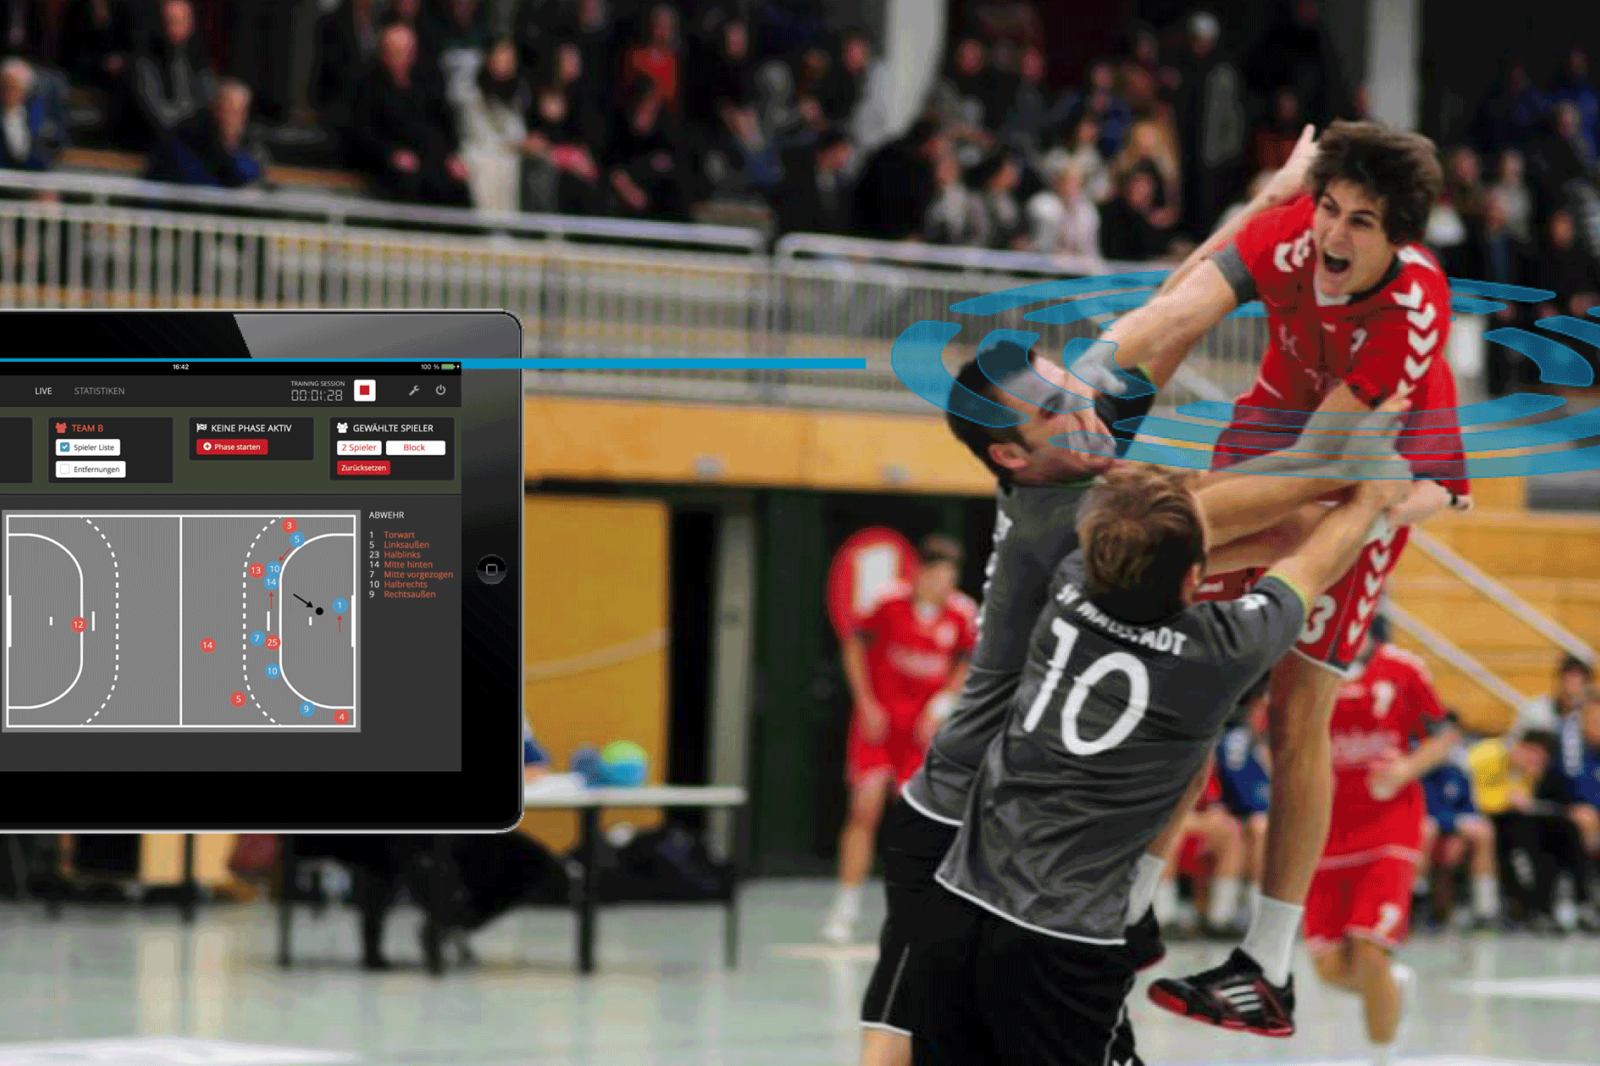 Handball offense duel with the KINEXON Sports statistic overlay is just one of the ways sports technology enhances team handball.